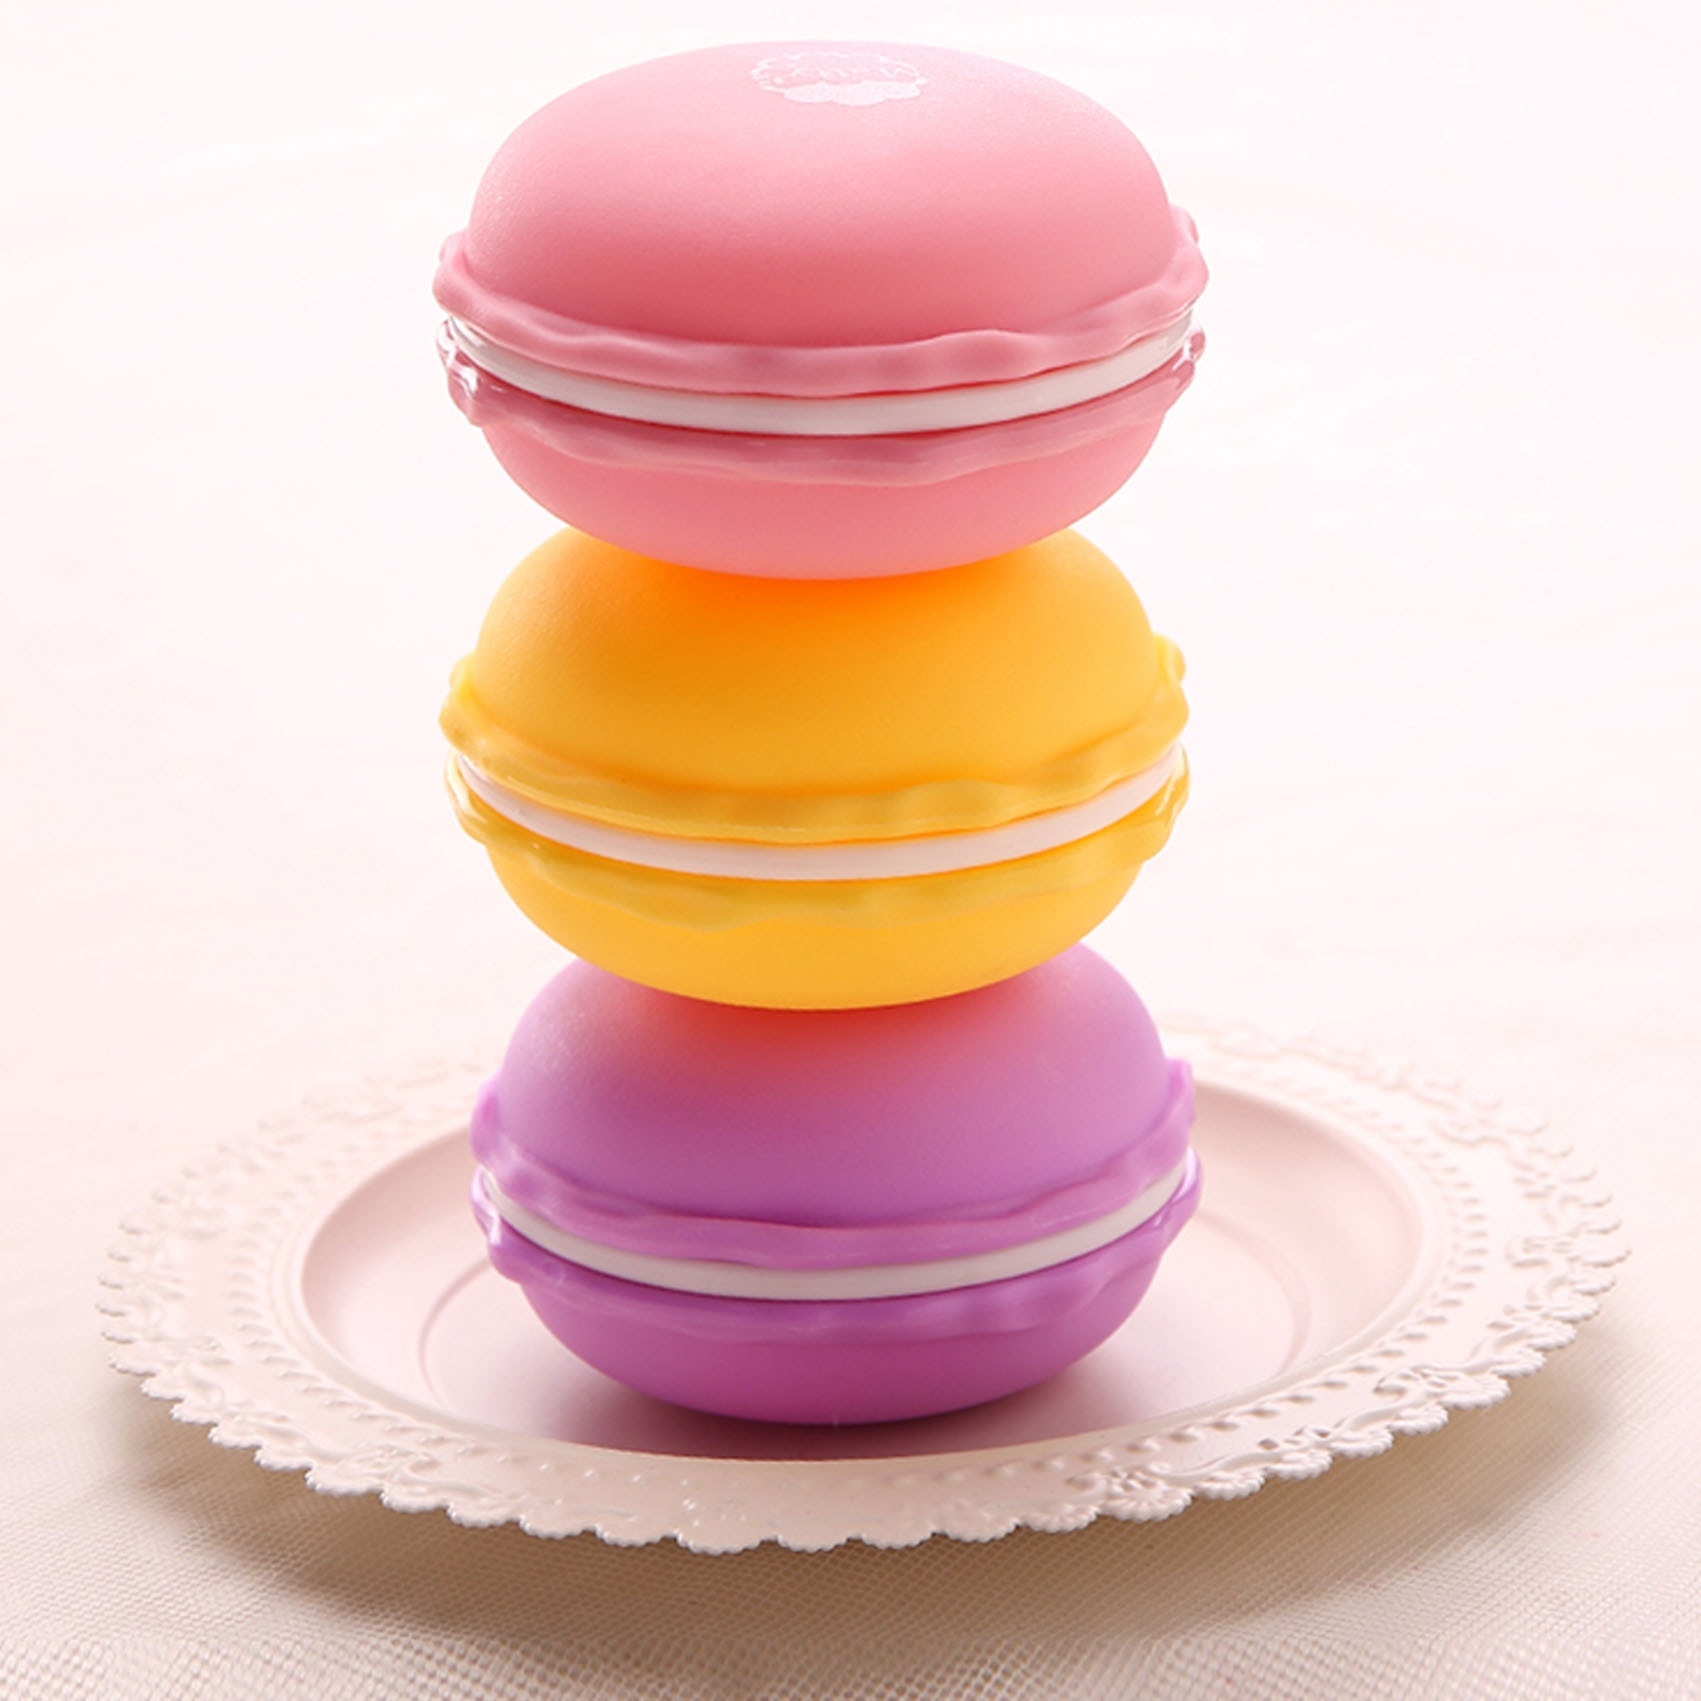 macaron storage containers set of 6 apollobox innovative beauty packaging